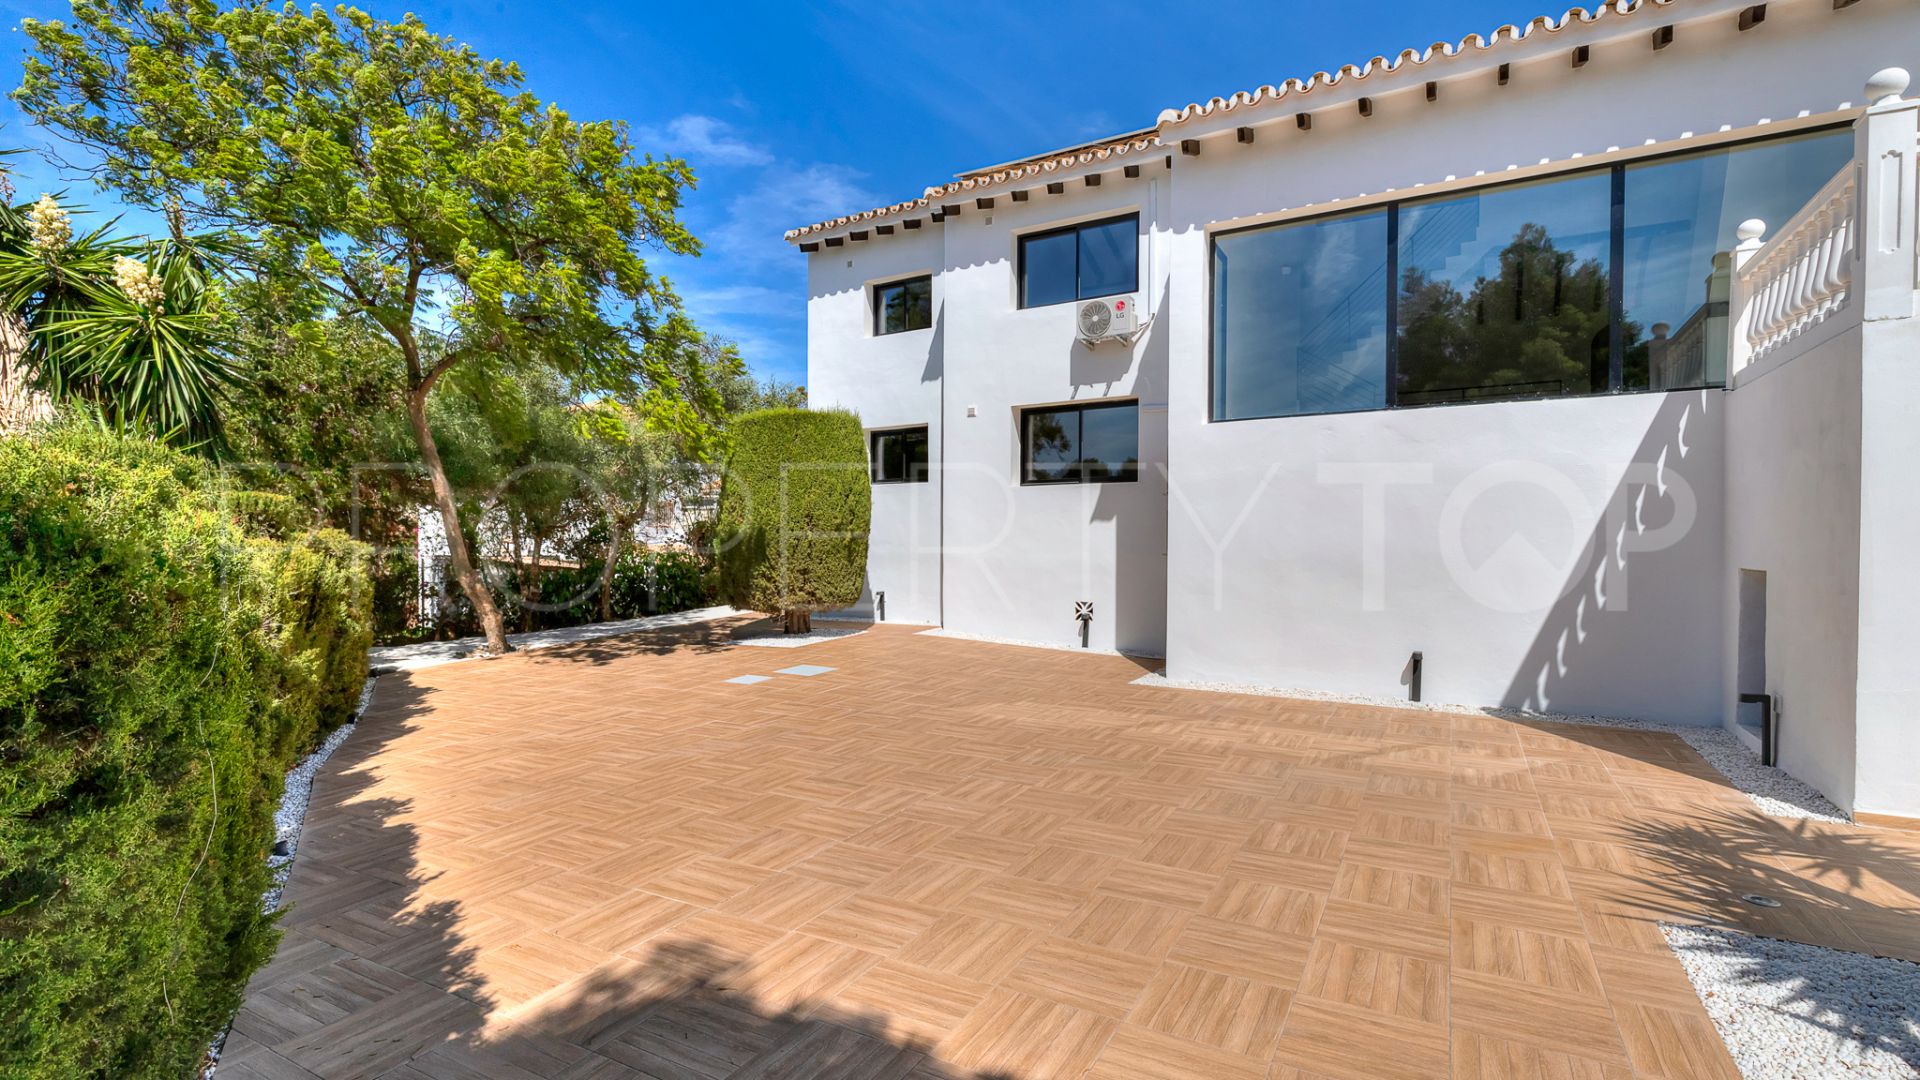 For sale villa in Campo Mijas with 5 bedrooms